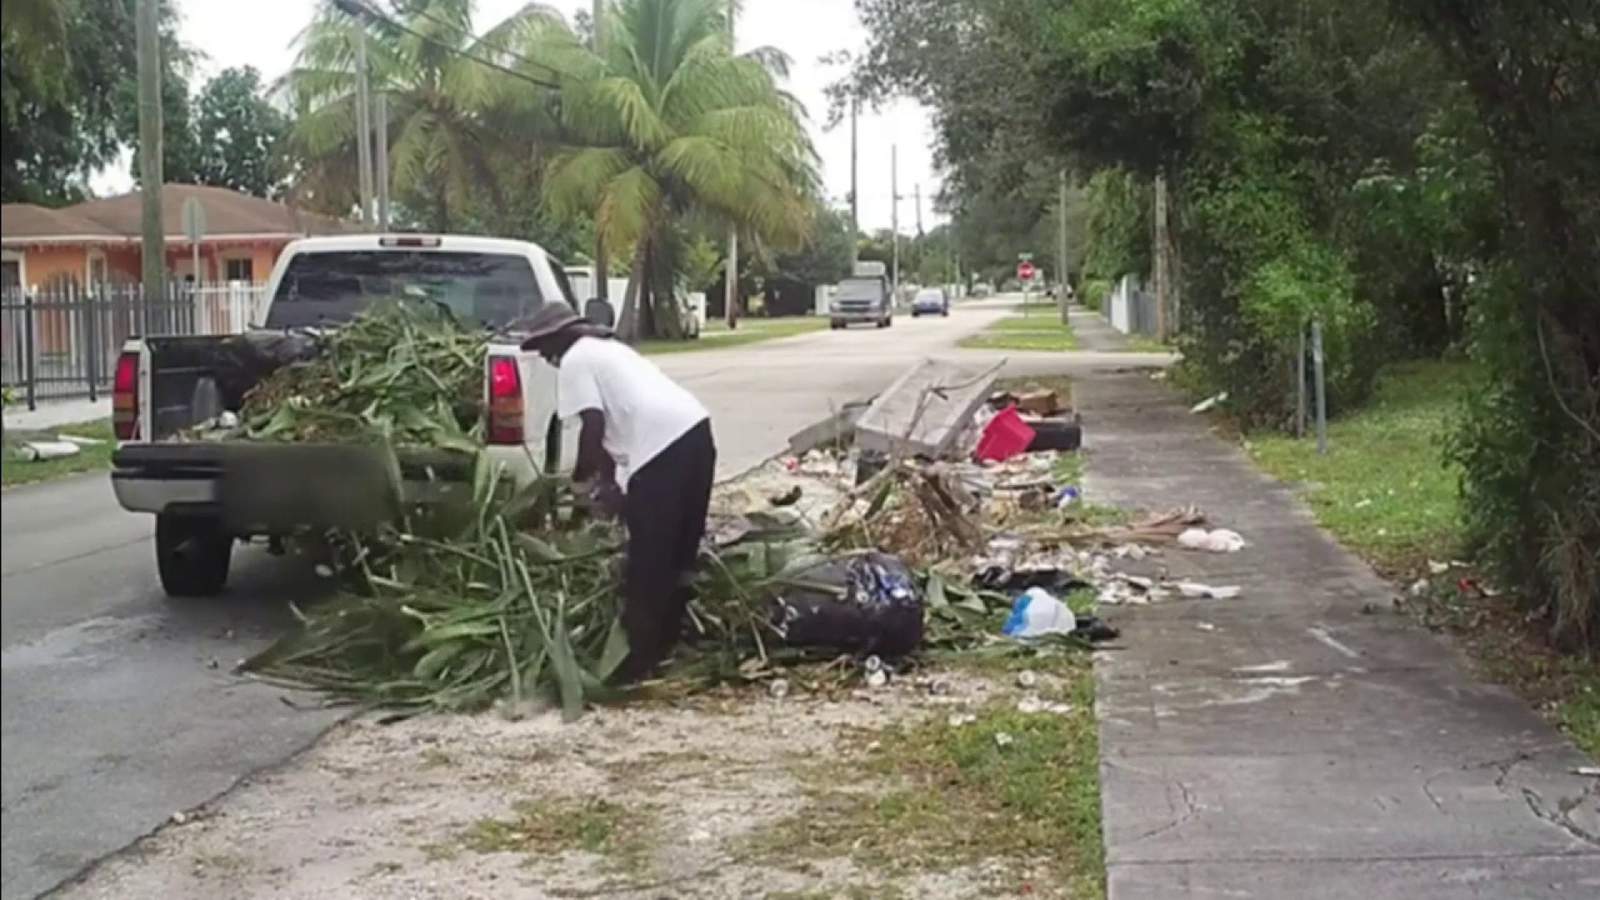 Caught on camera: Grandfather, grandson arrested for illegal dumping in NW Miami-Dade